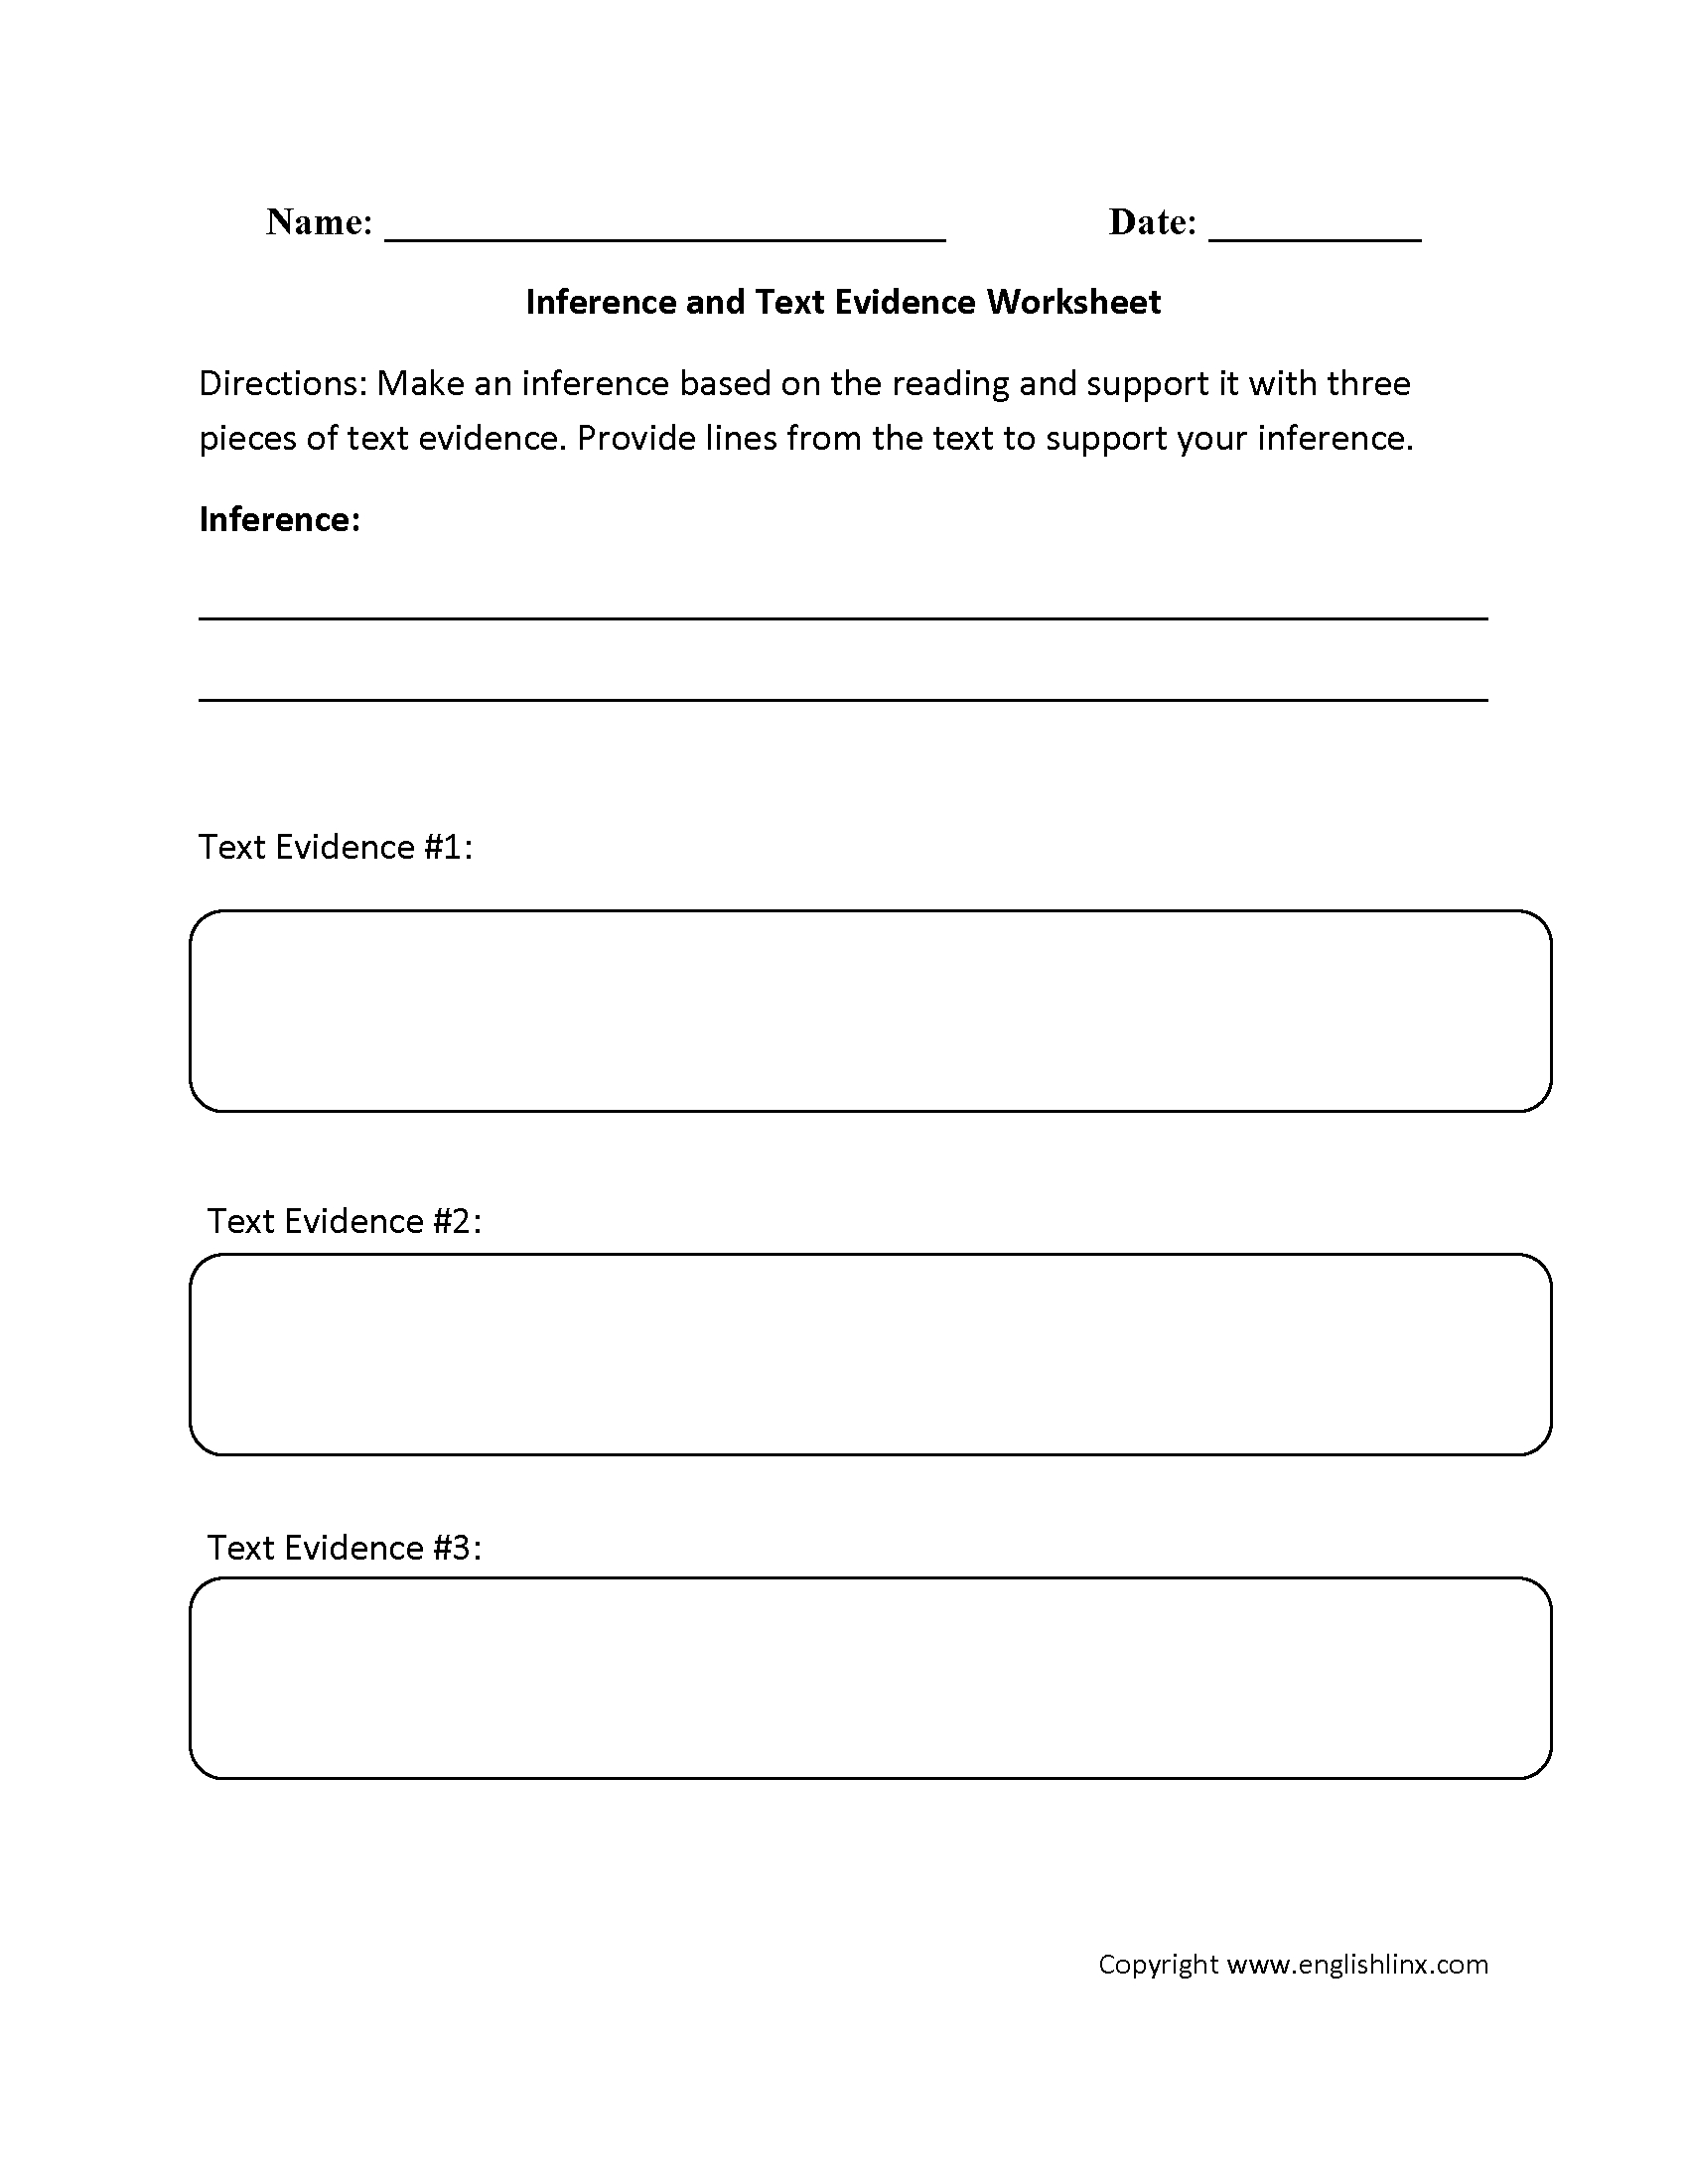 citing textual evidence worksheet 6th grade